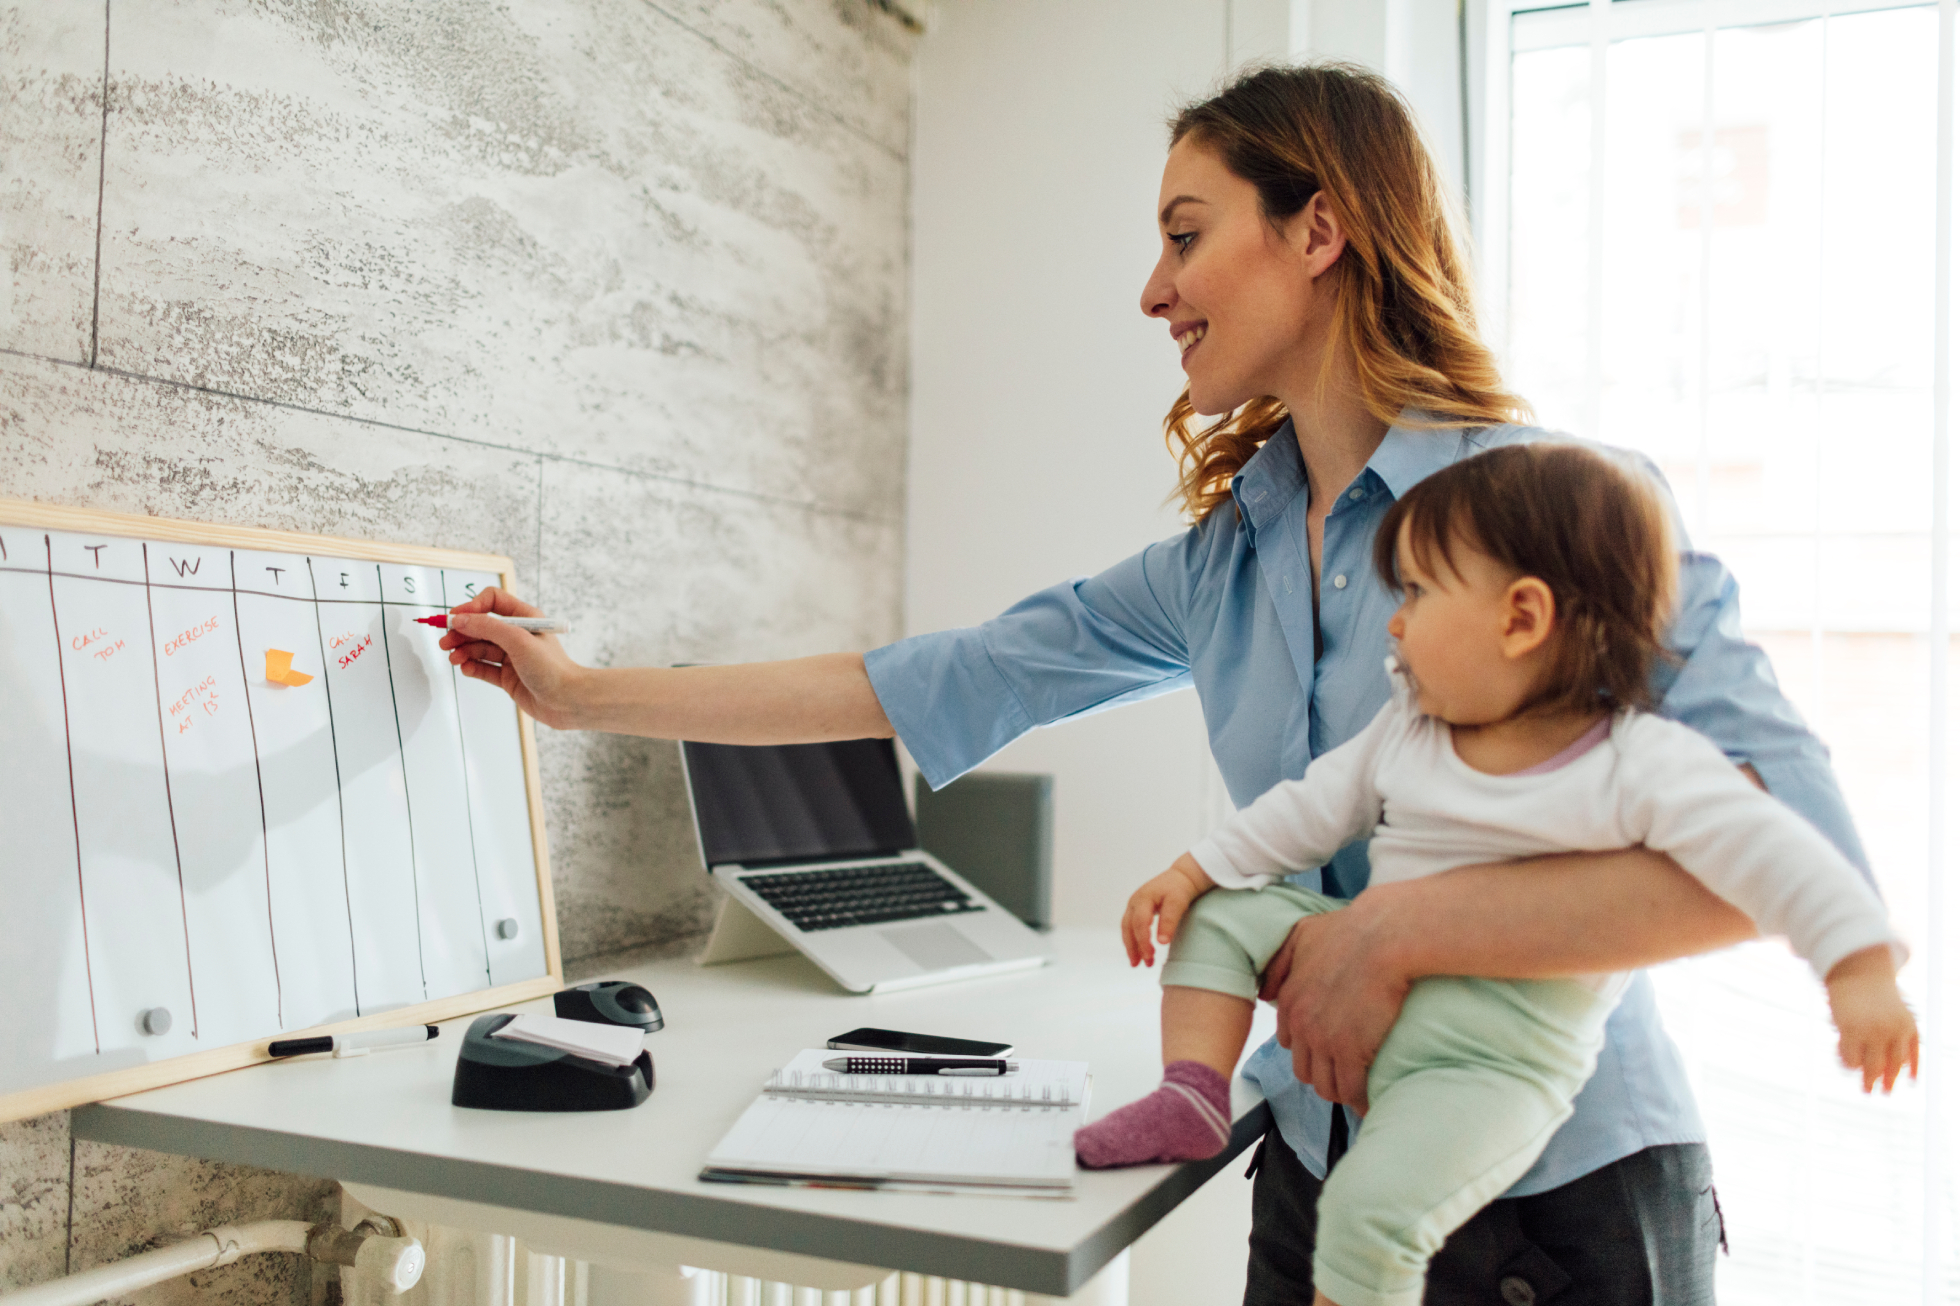 A mother holding a baby and writing on a whiteboard